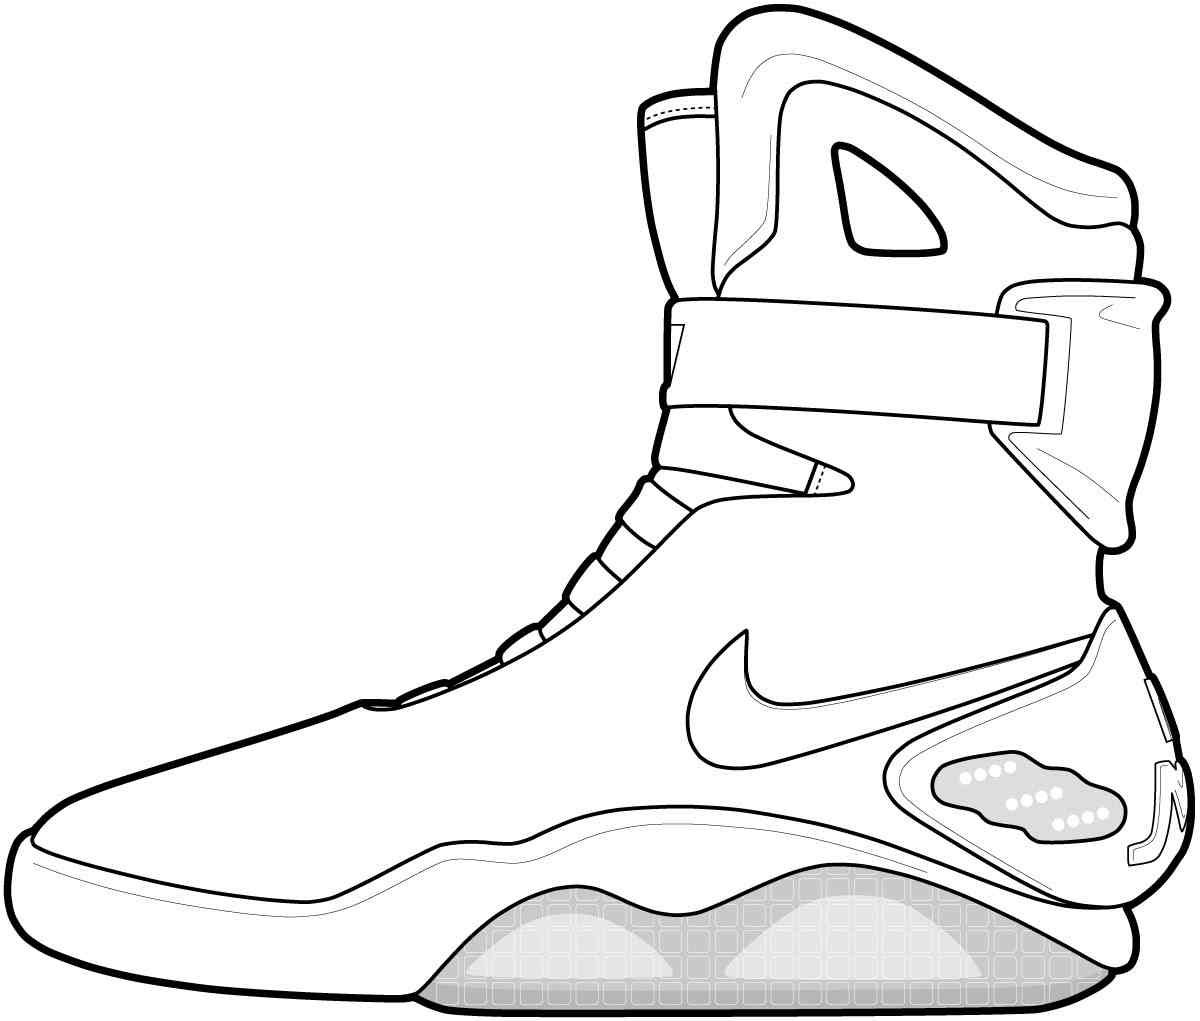 Free Nike Coloring Pages, Download Free Clip Art, Free Clip Art on ...